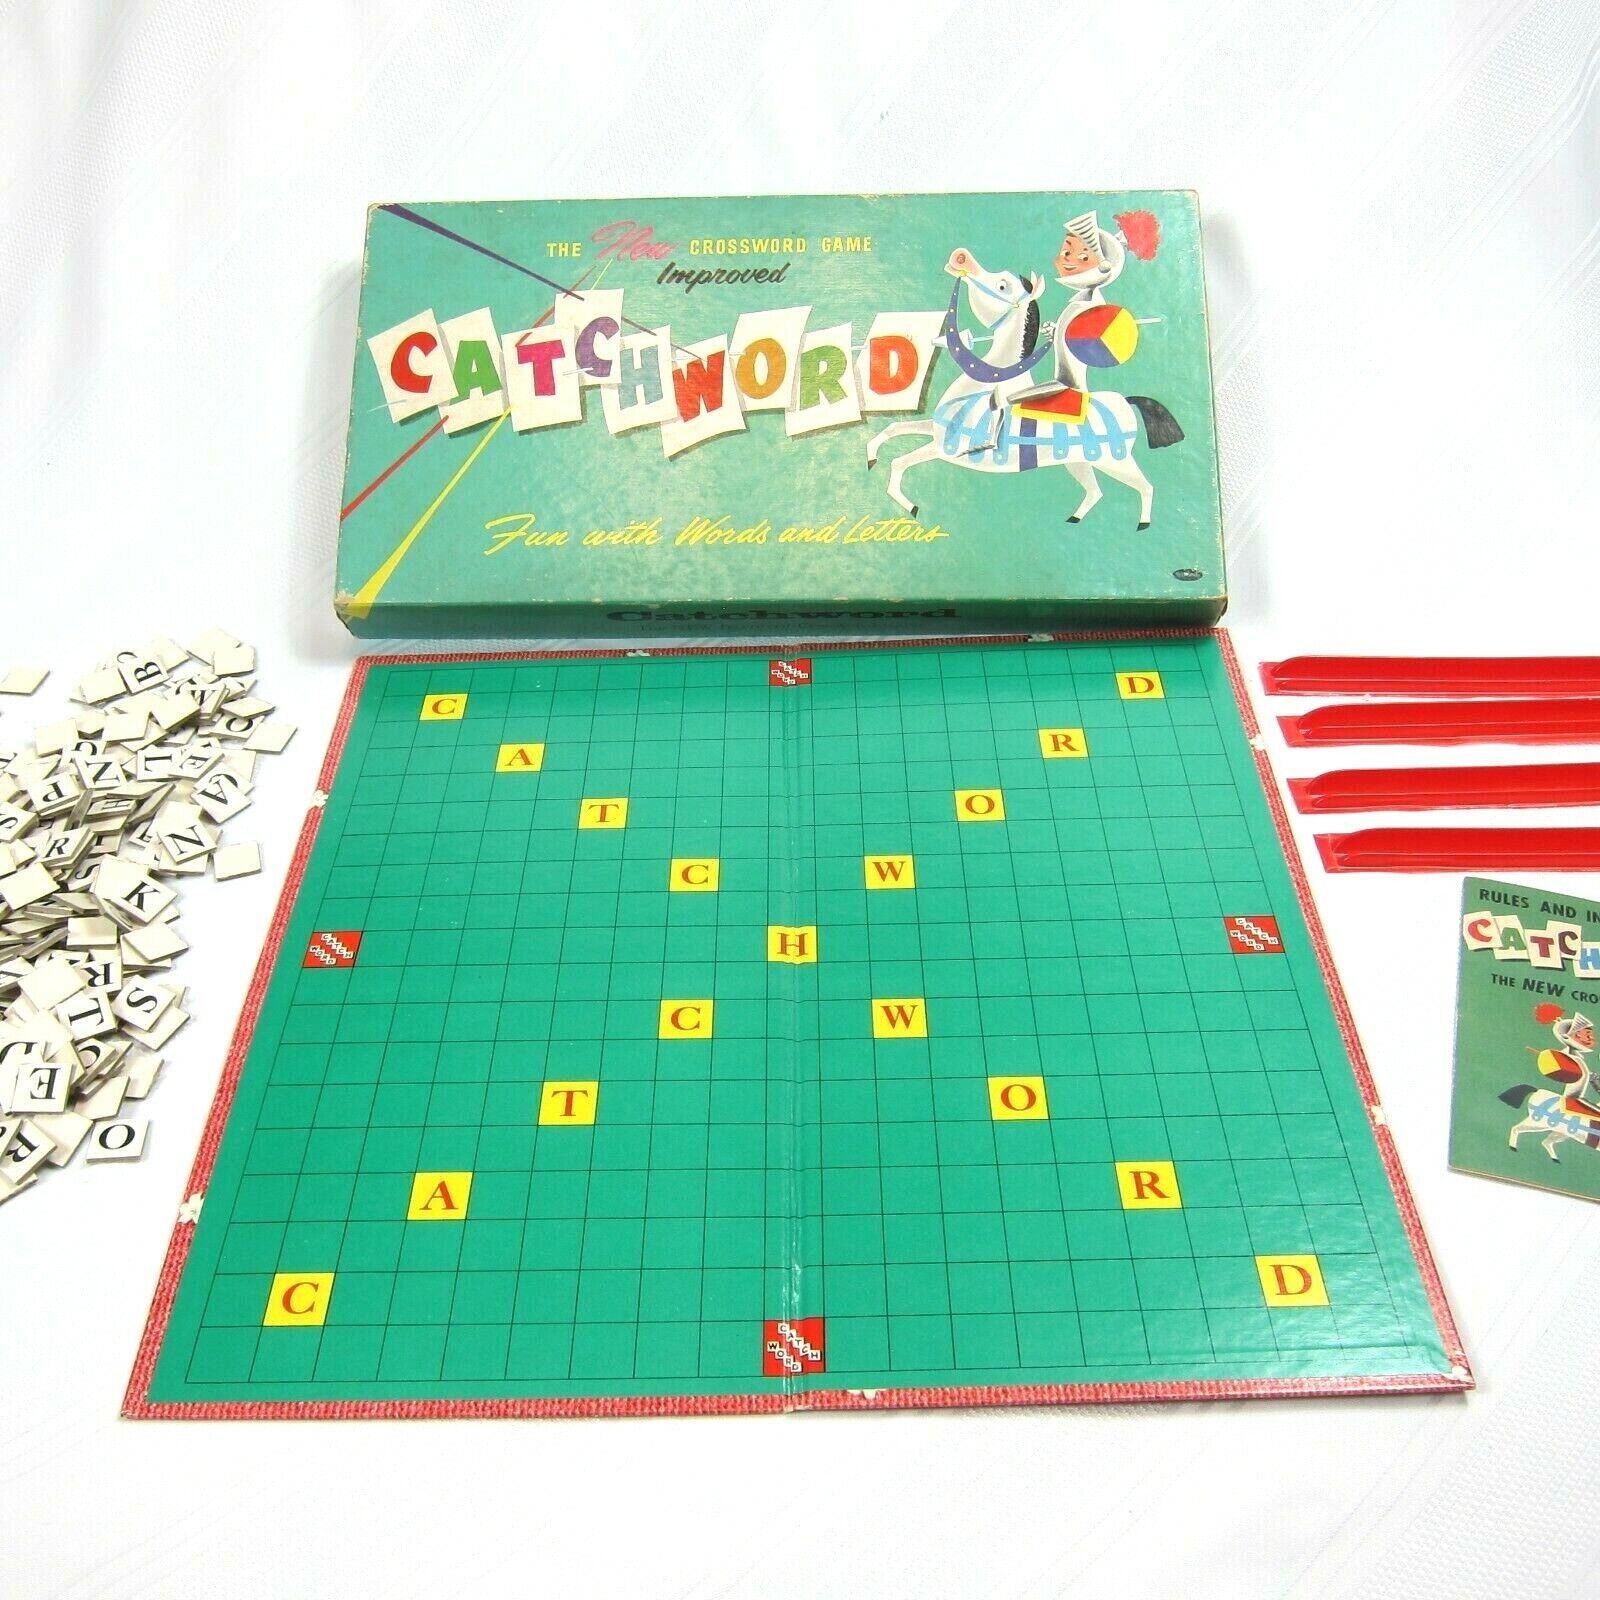 Vintage 1950s Catchword Crossword Board Game Whitman Publishing Co. Made in USA - $19.99